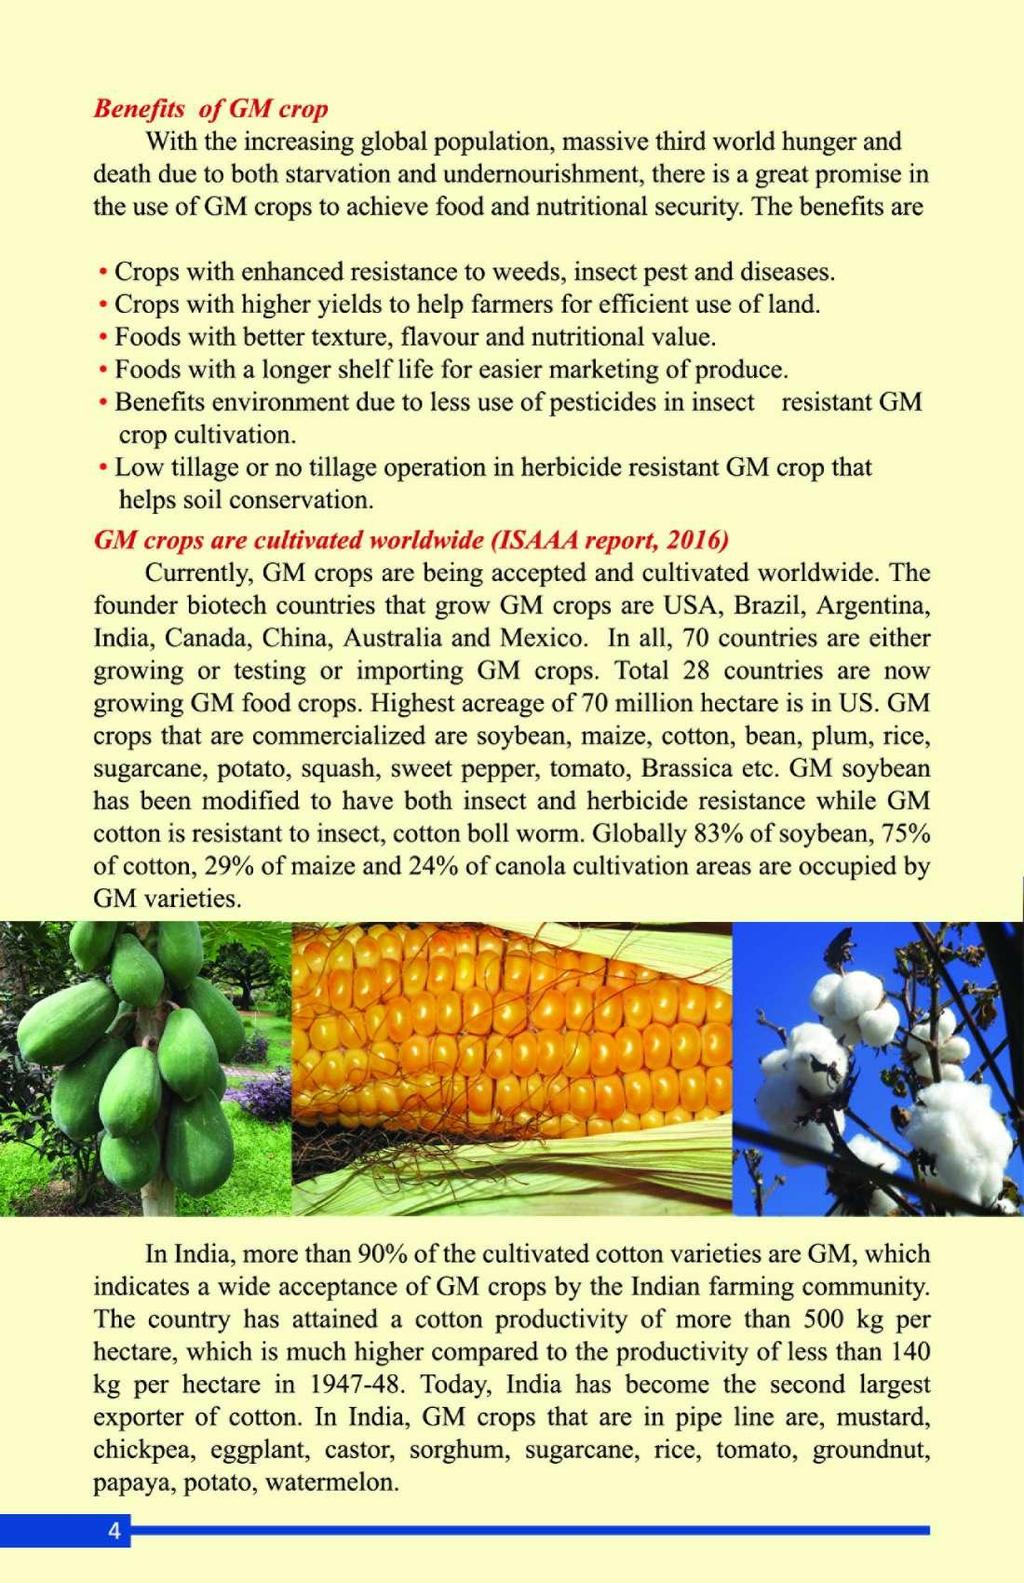 Benefits of GM crop With the increasing global population, massive third world hunger and death due to both starvation and undernourishment, there is a great promise in the use of GM crops to achieve